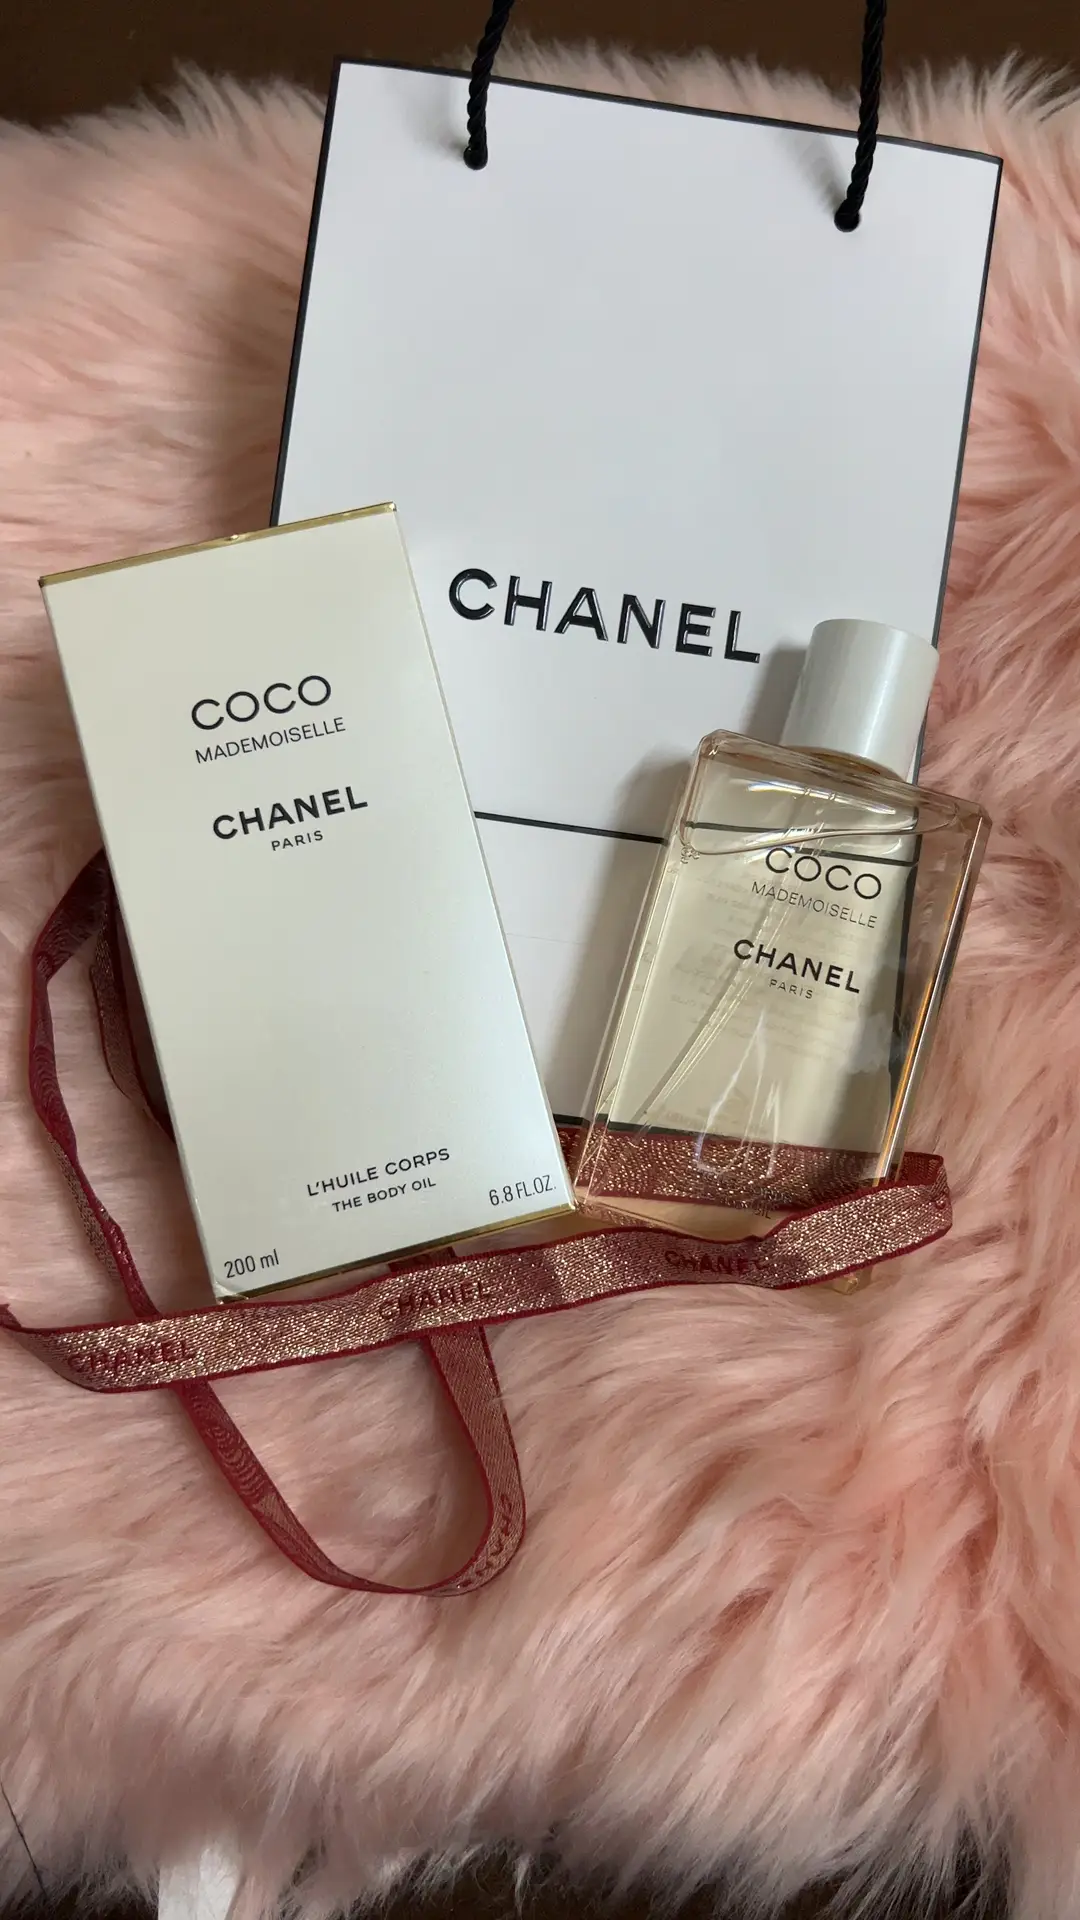 Chanel Coco Mademoiselle Body Oil Review, Video published by Aida Haida